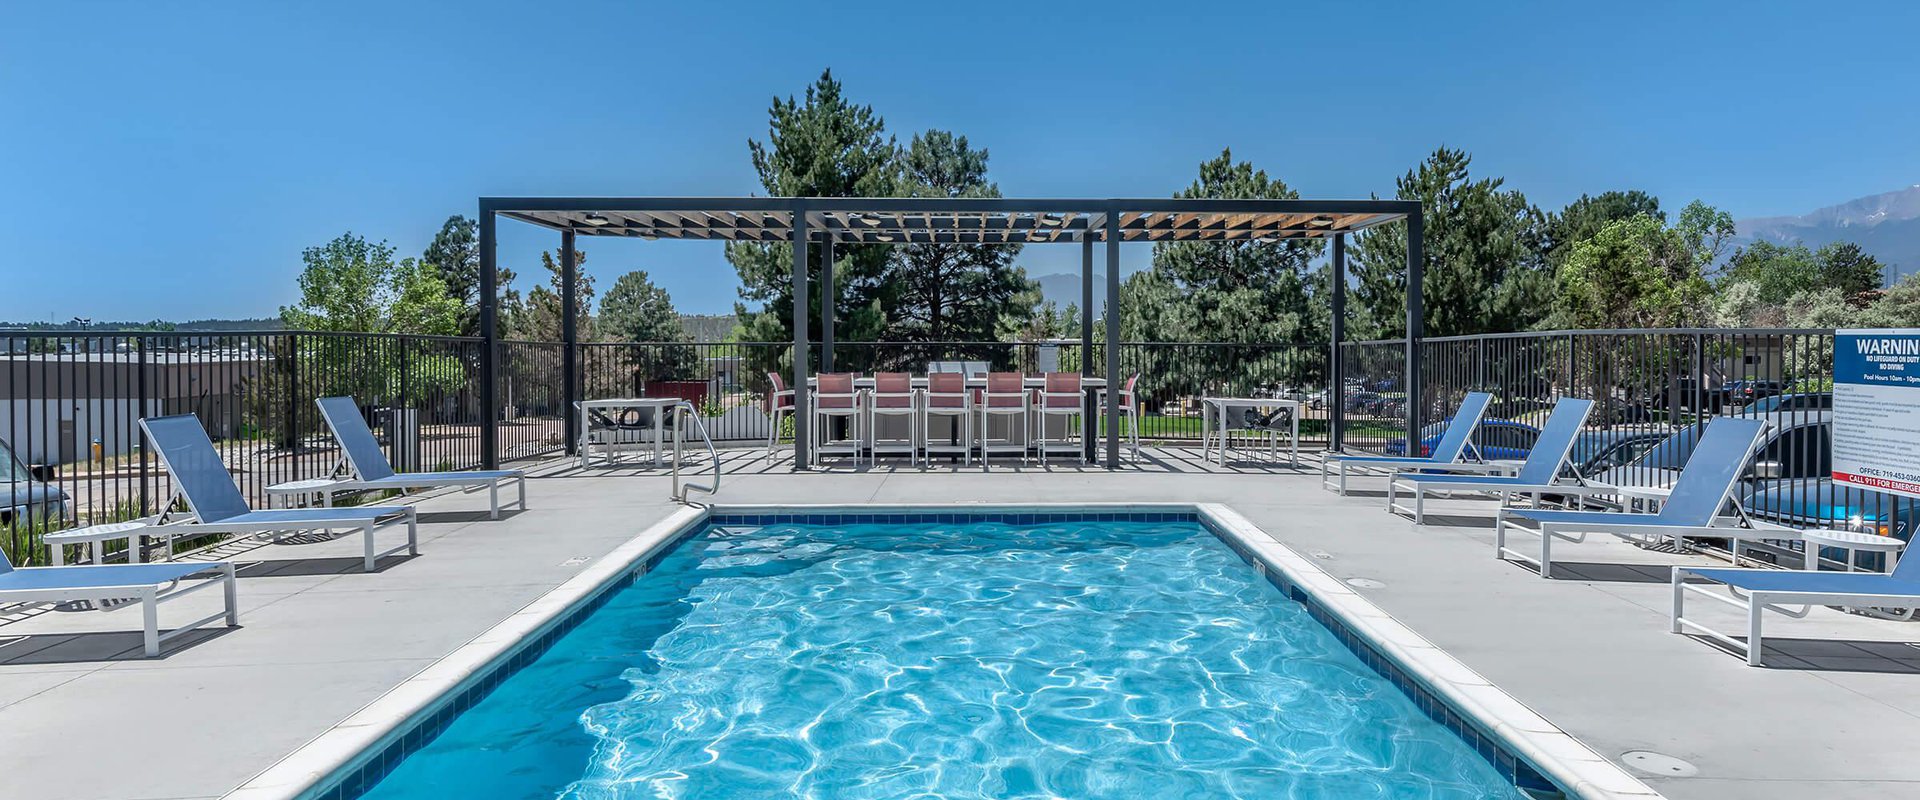 Swimming pool with lounge chairs at North 49 Apartments, located in Colorado Springs, CO 4